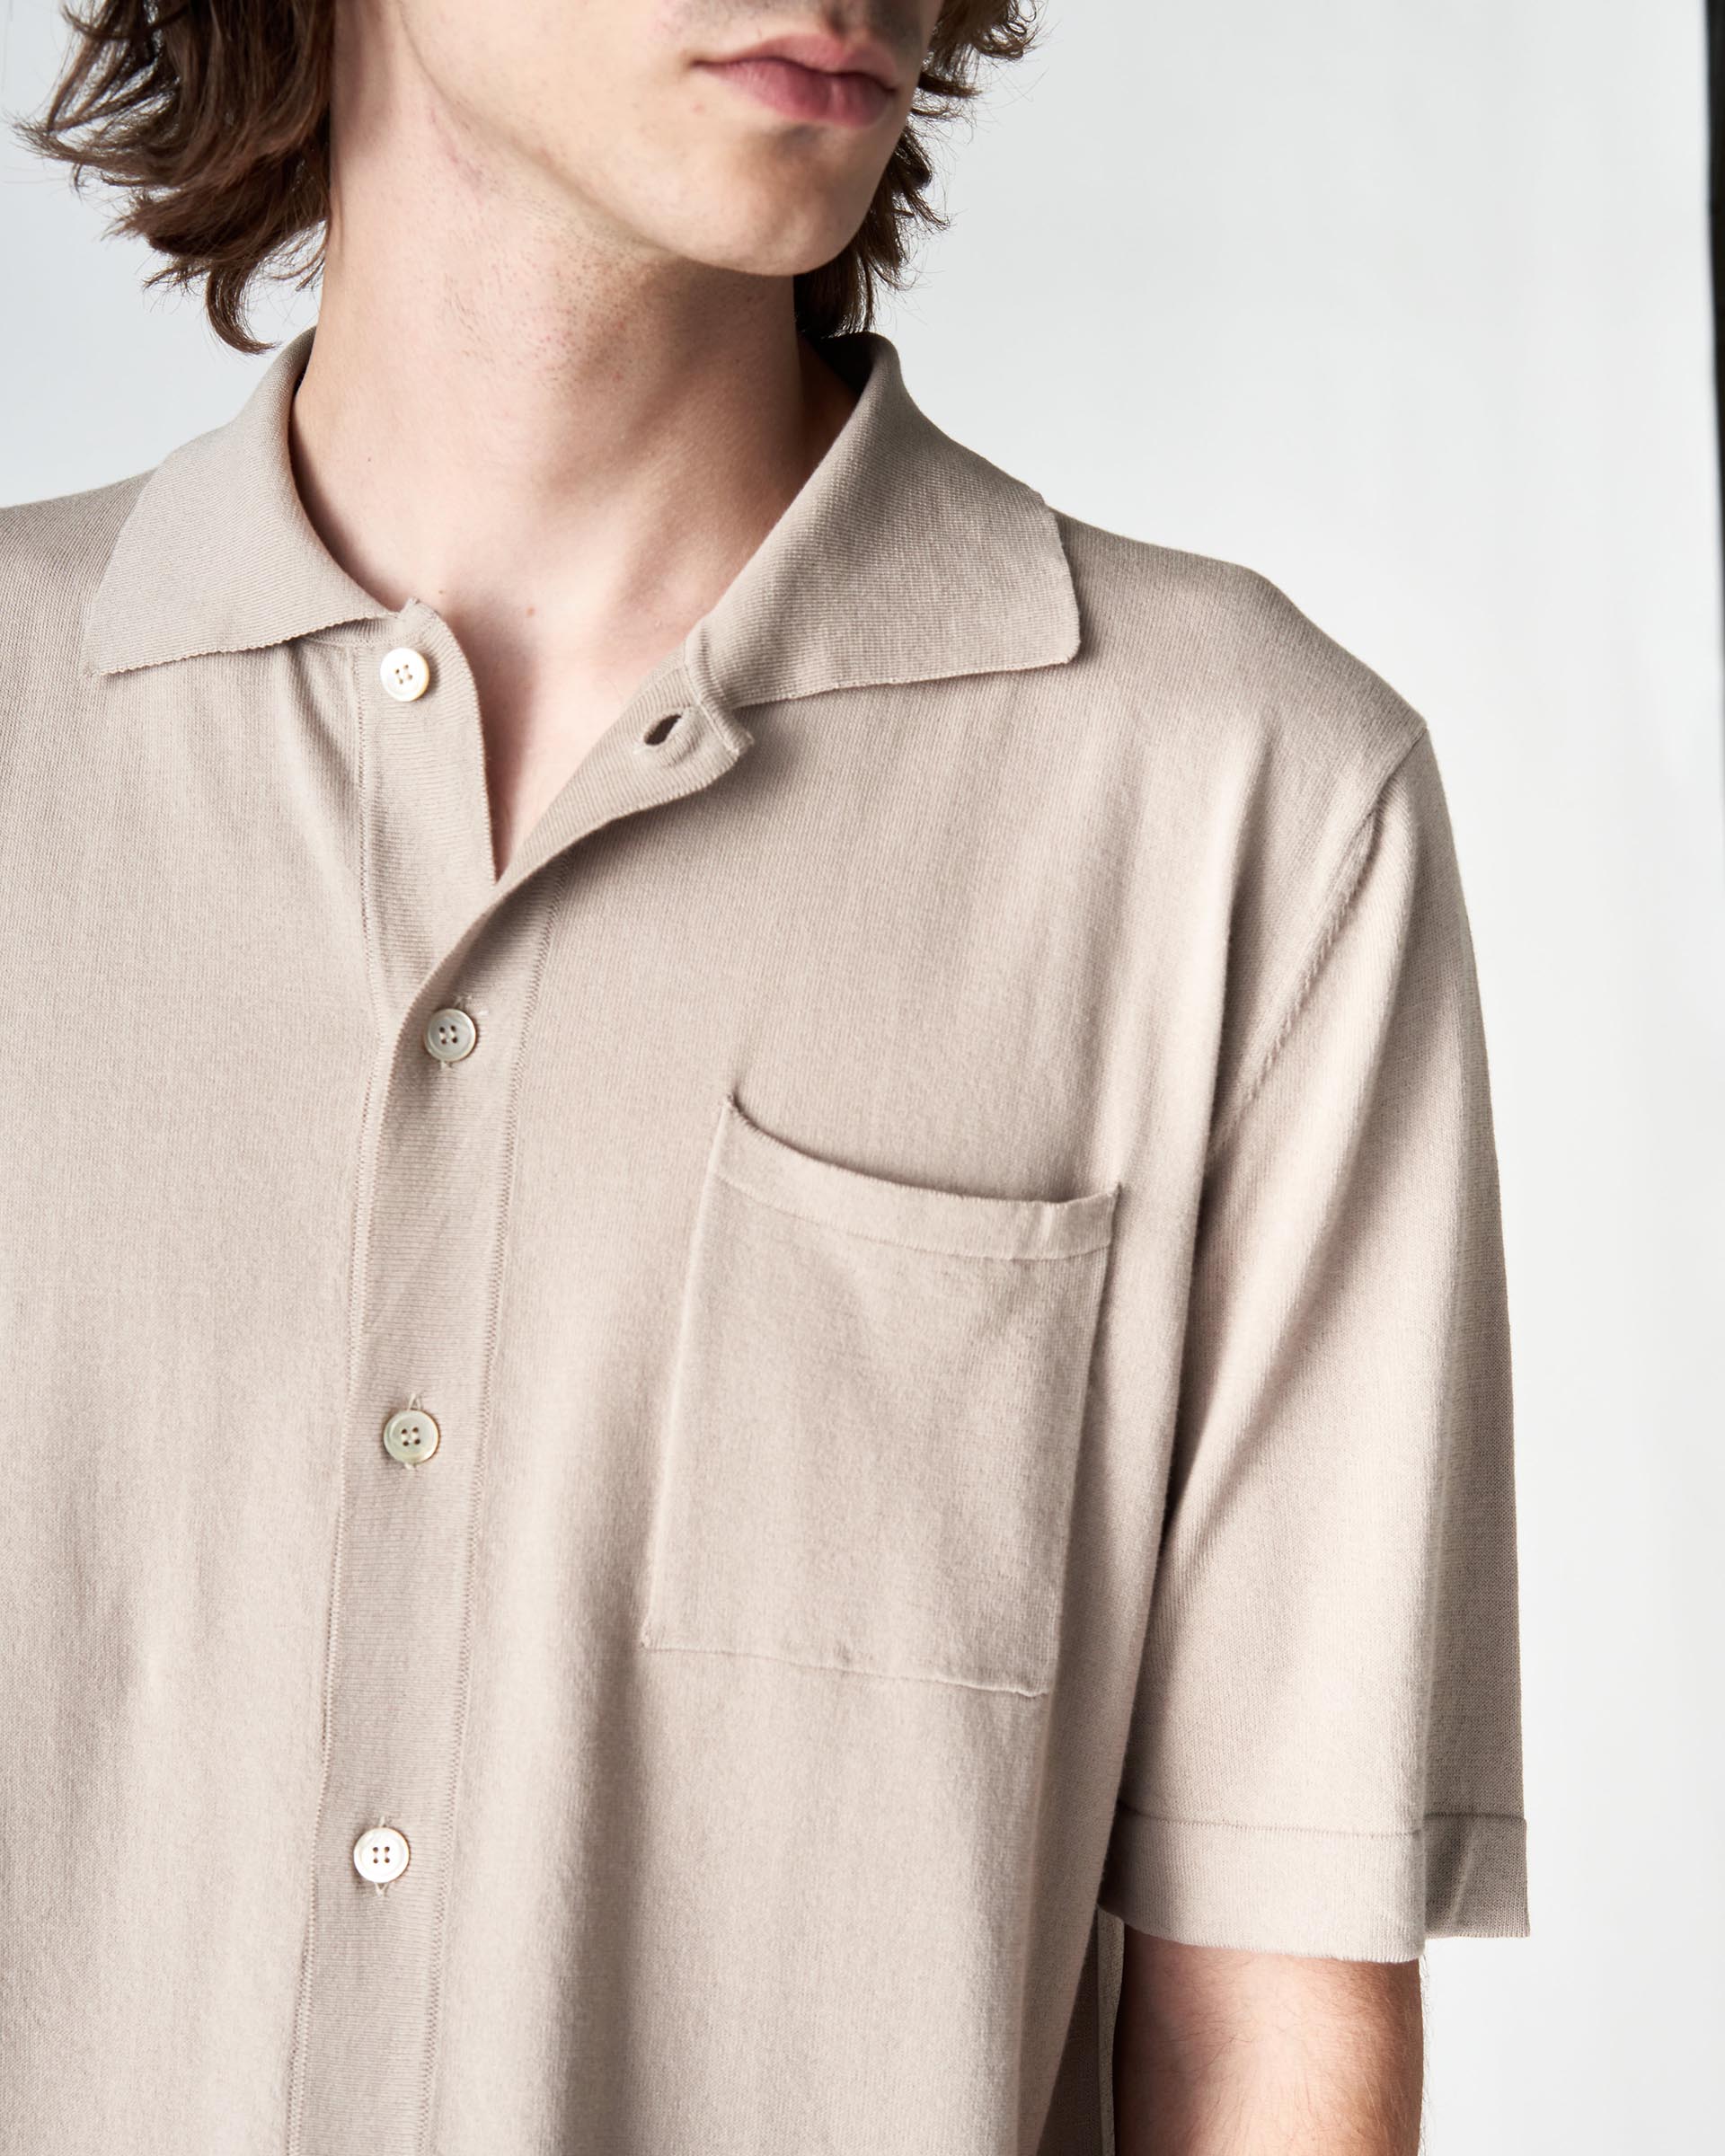 The Market Store | Knitted Shirt